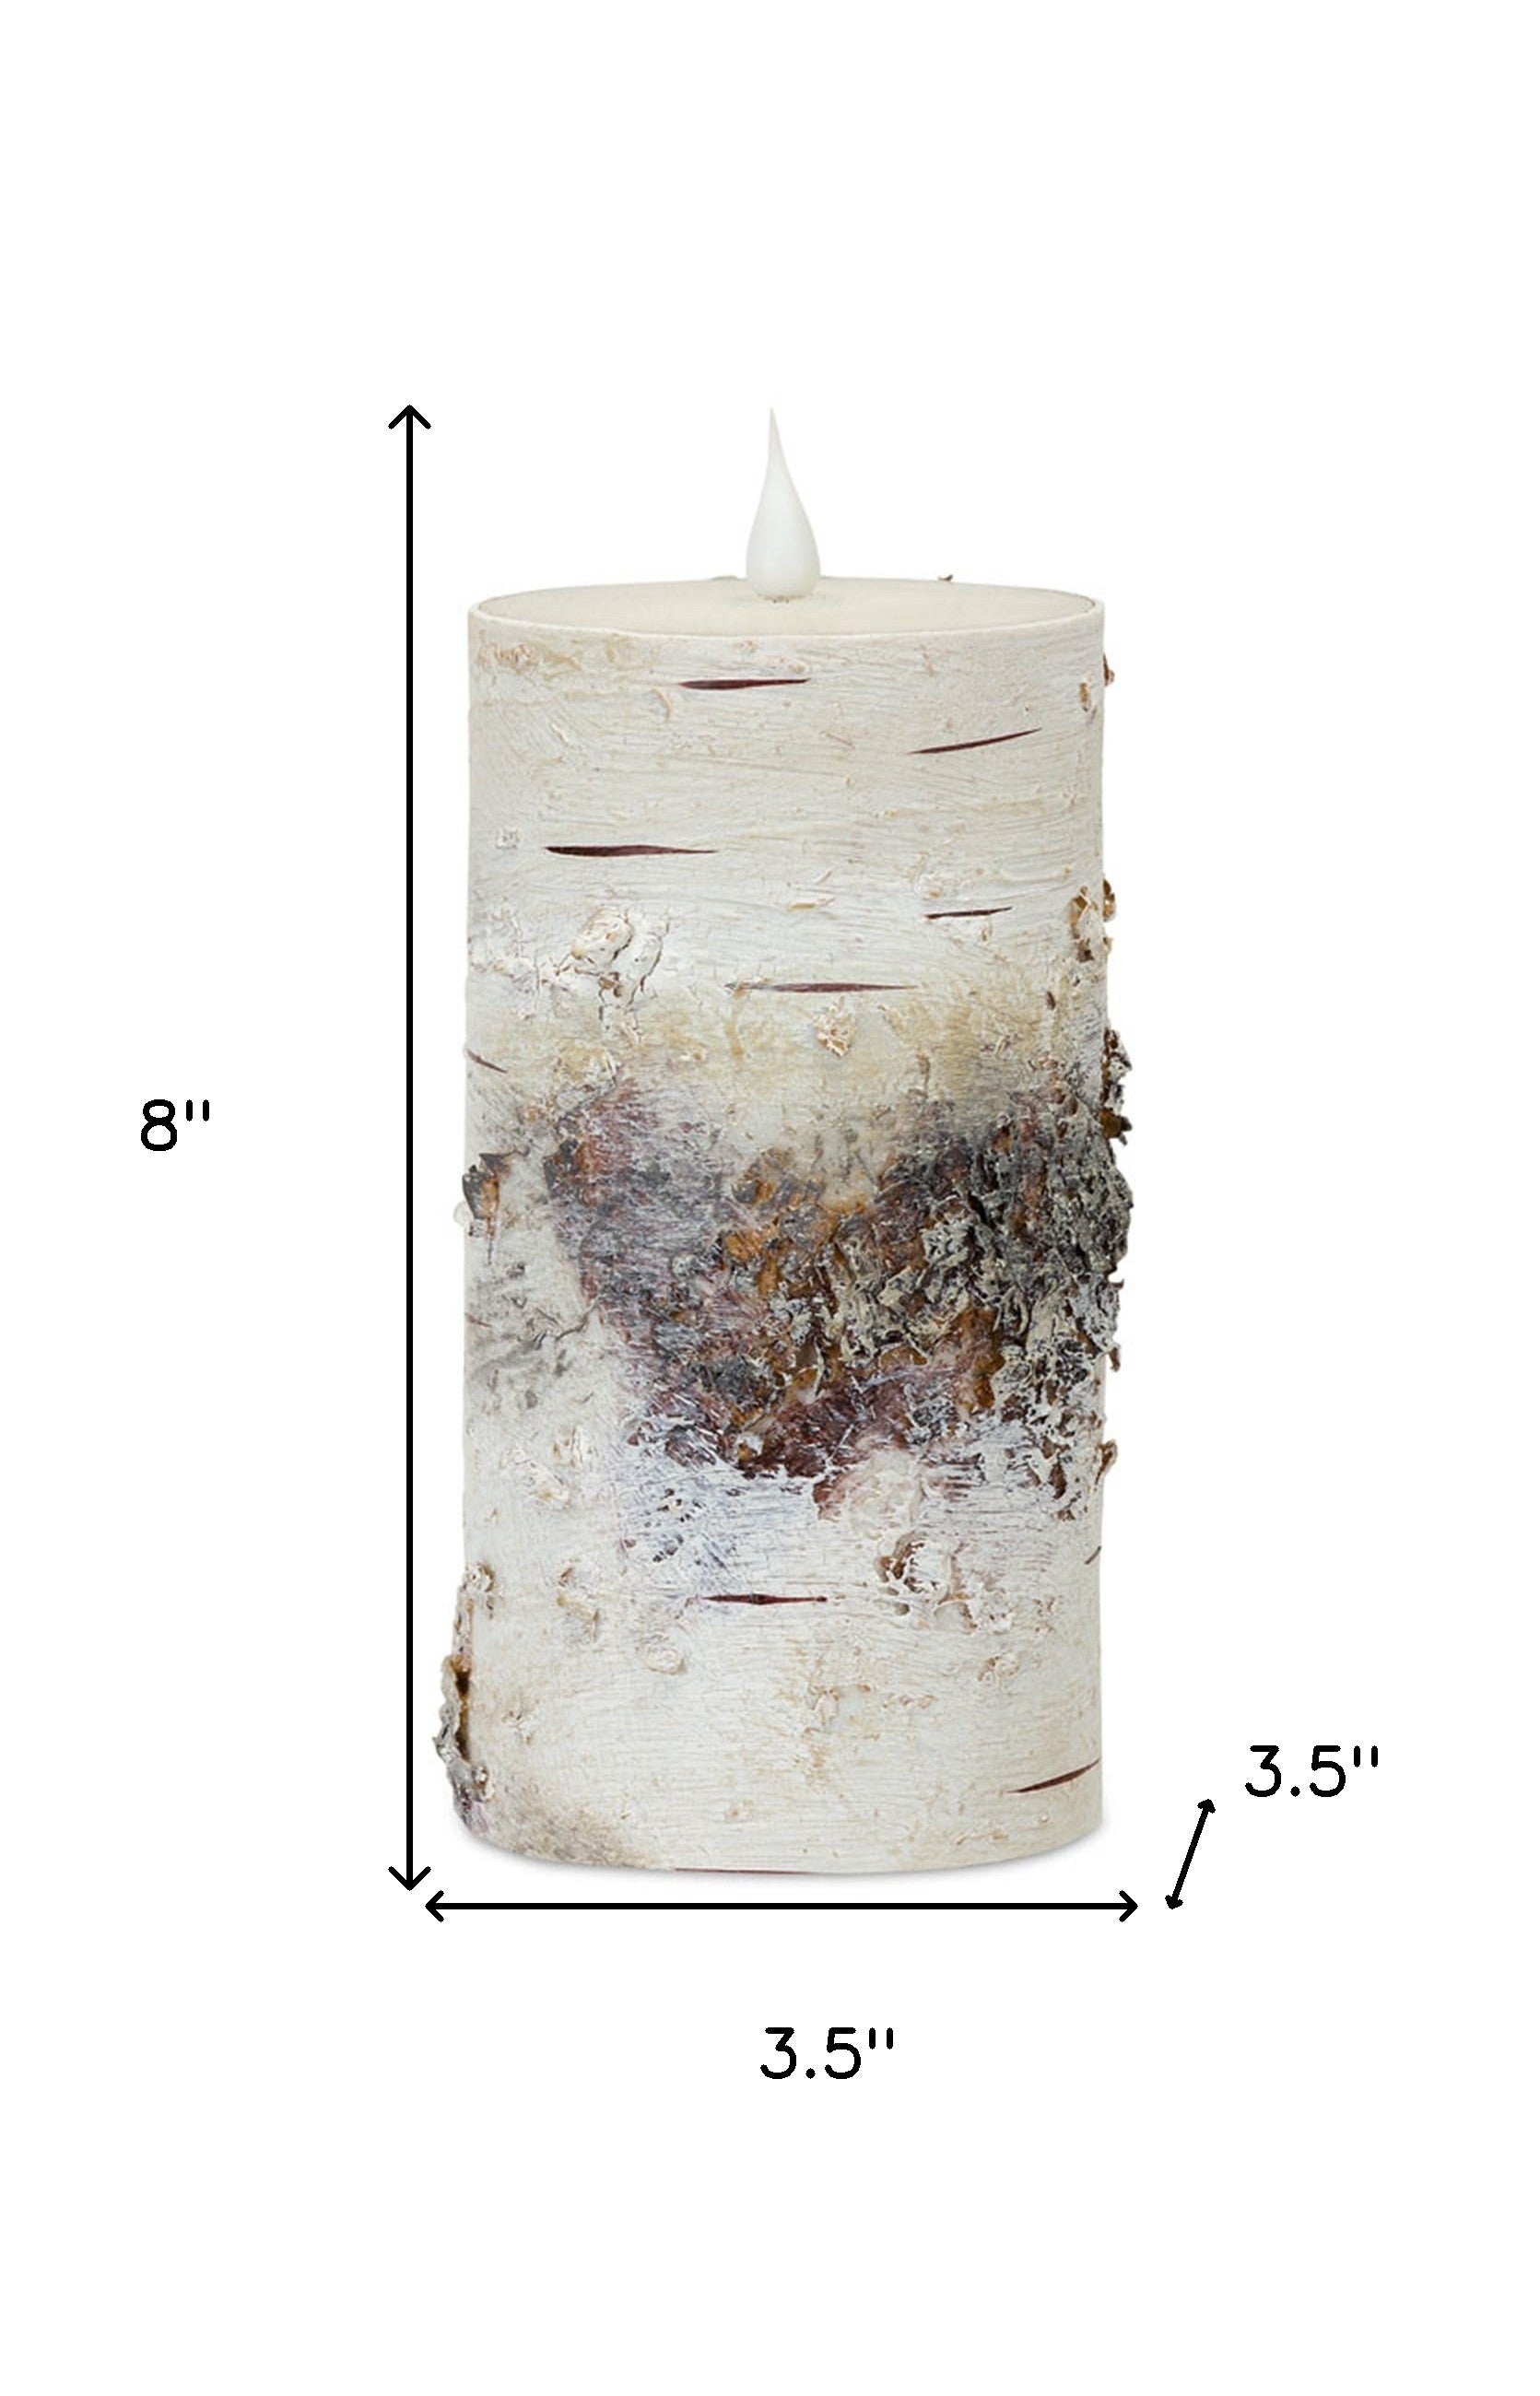 8" Beige and Ivory Flameless Pillar Candle